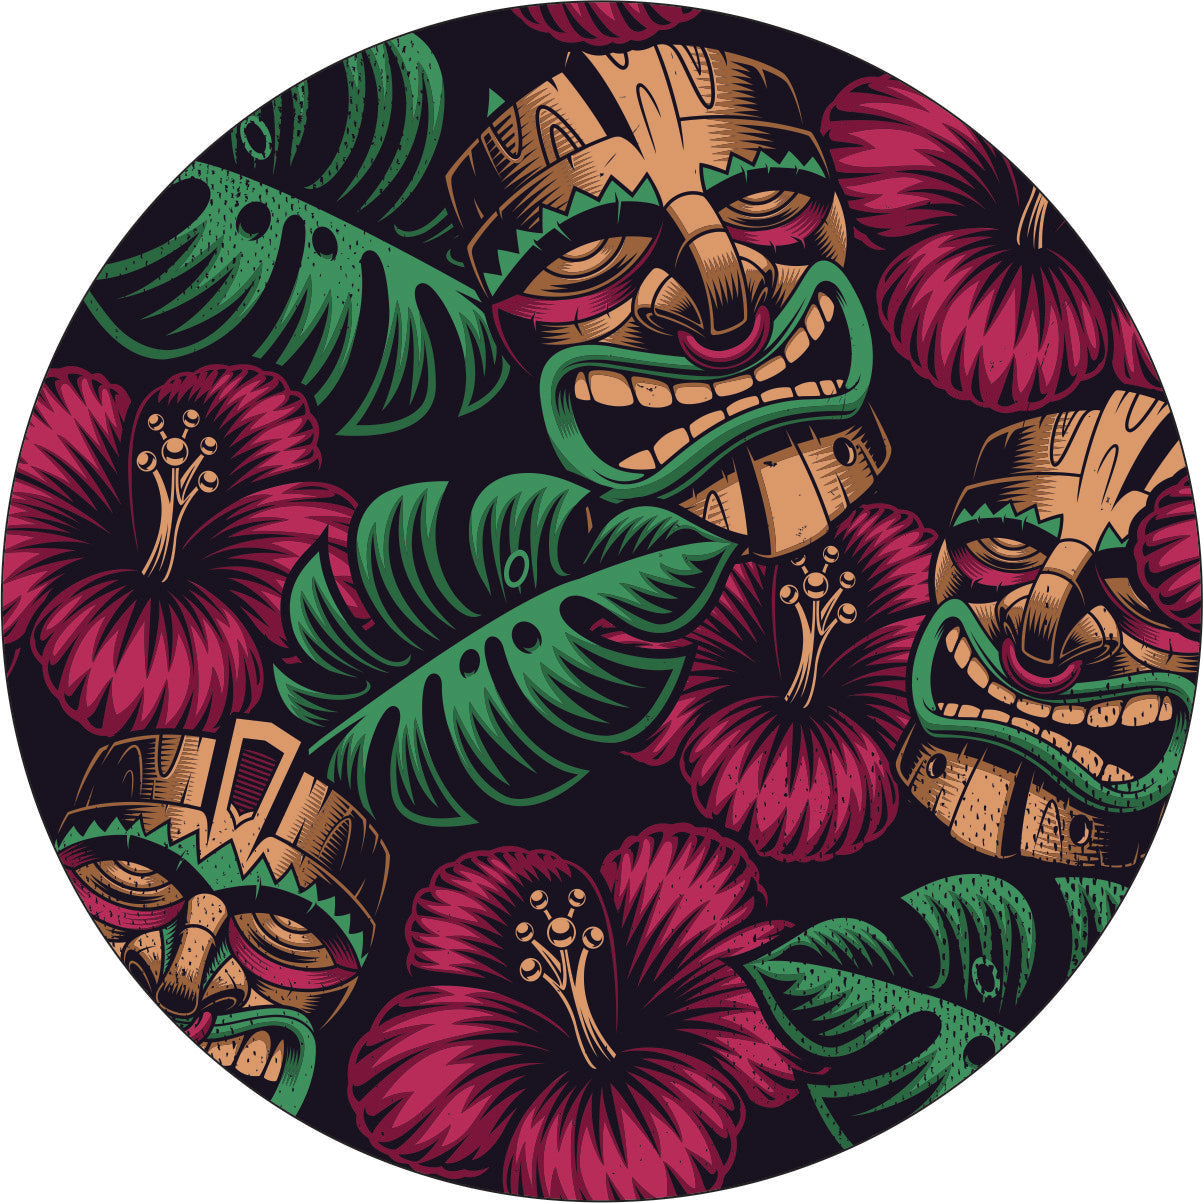 Hibiscus flowers and tiki mask pattern custom made to order spare tire cover design for black vinyl wheel covers on Jeeps, RV, Campers, Trailers, Broncos and more